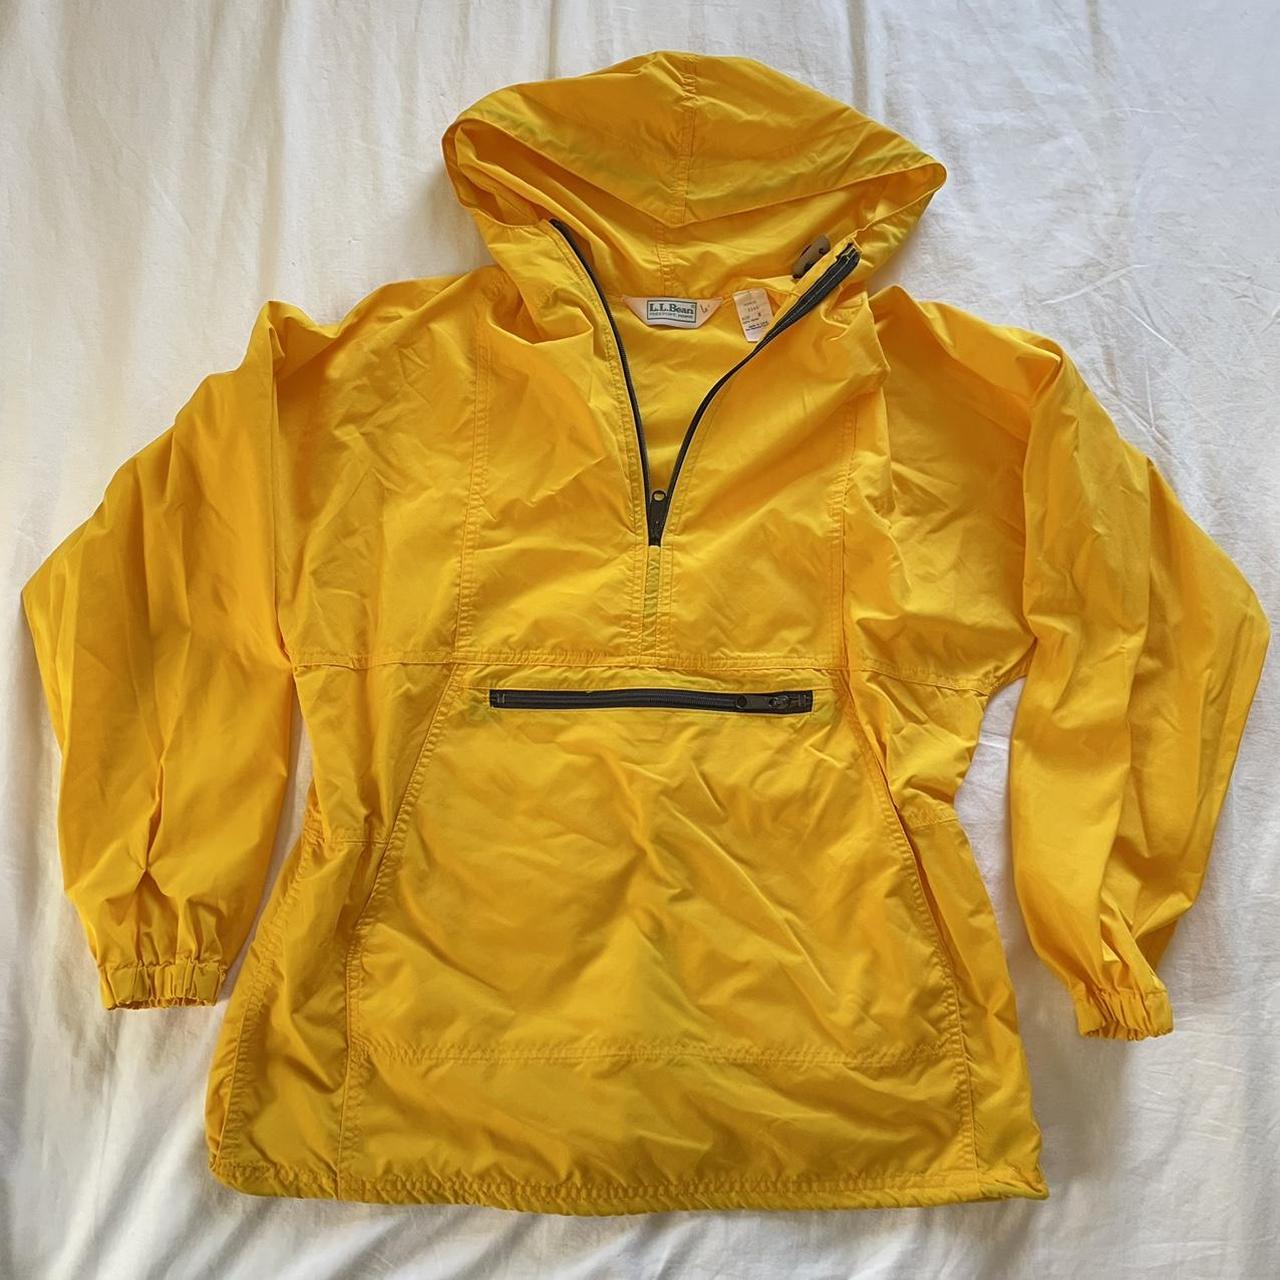 Vintage 80s 90s LL Bean Windbreaker - 20” pit to pit...